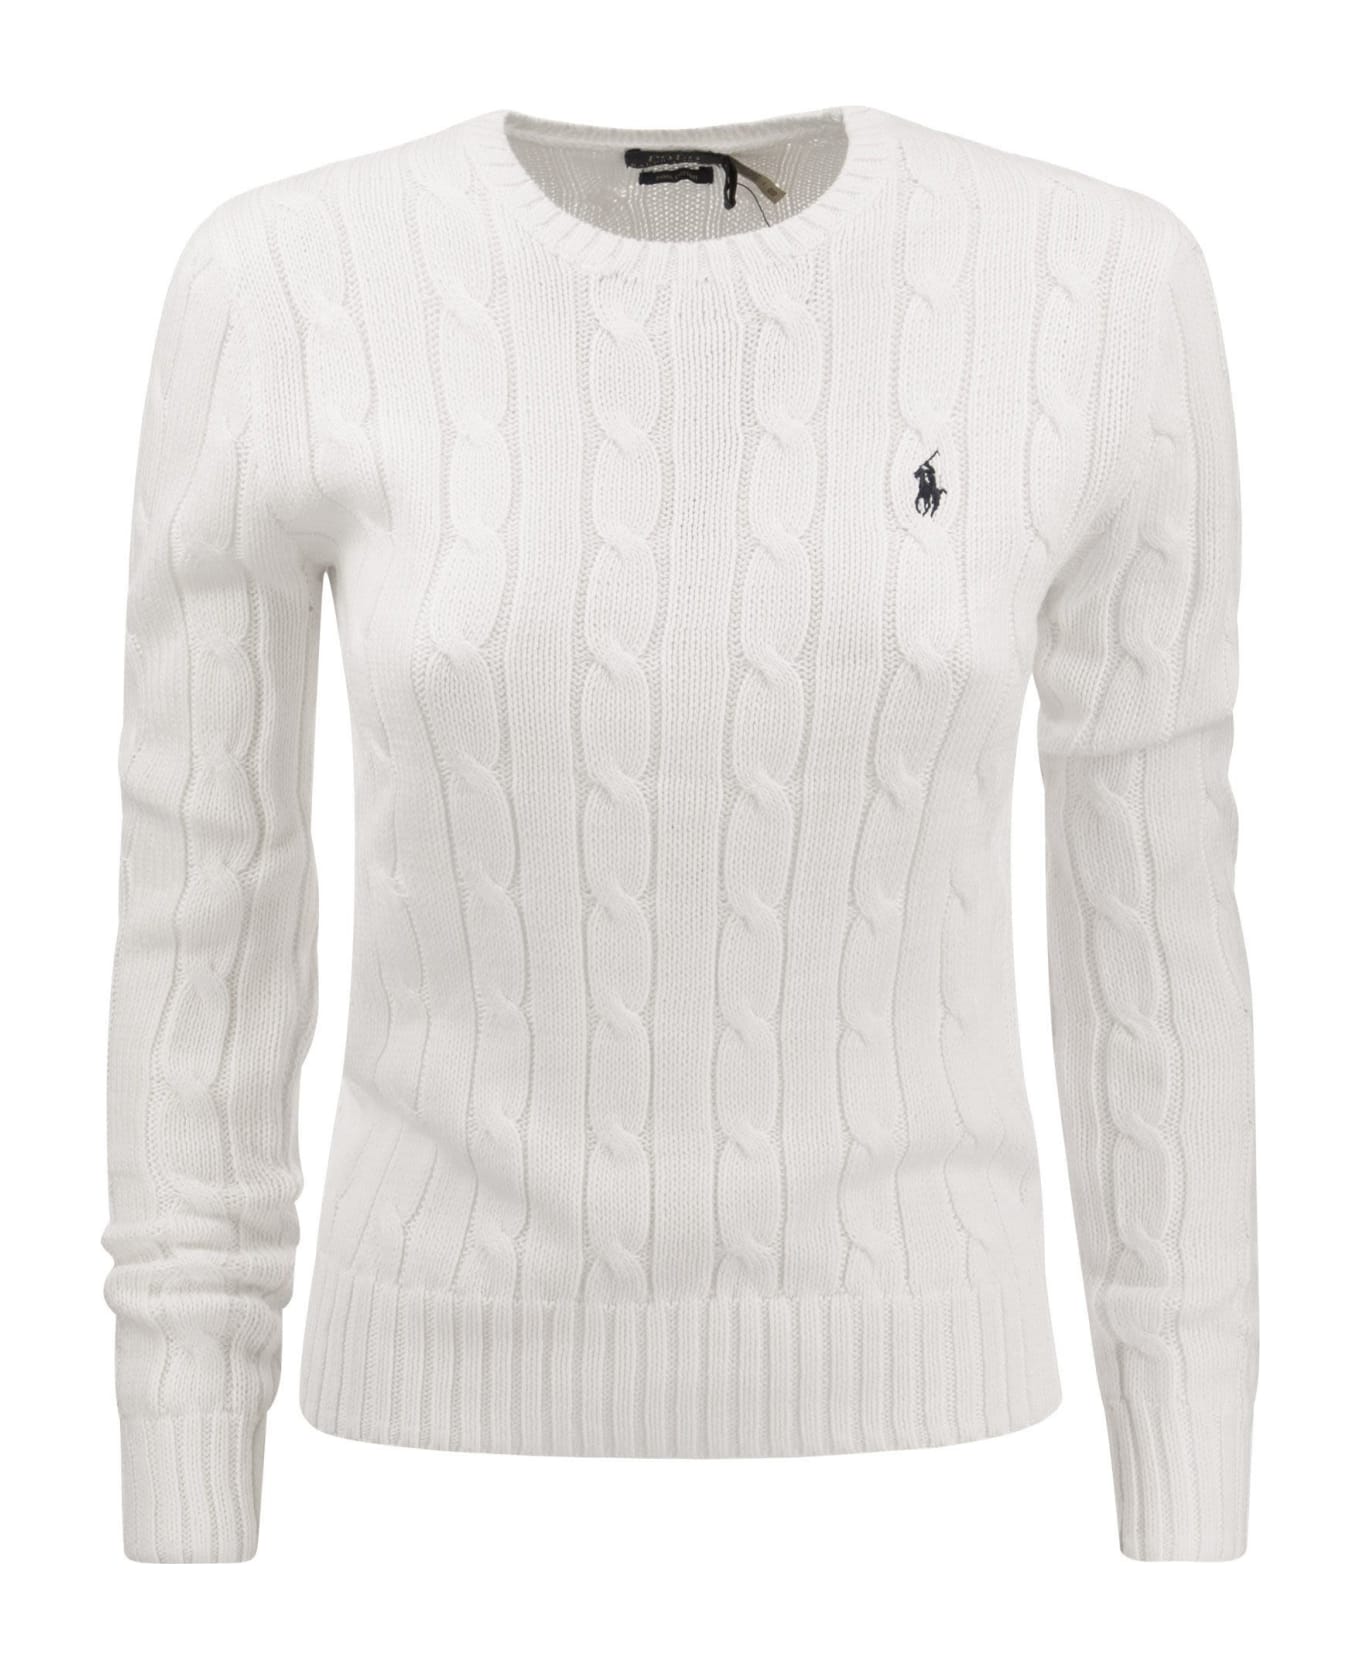 Polo Ralph Lauren Crew Neck Sweater In White Braided Knit - Bianco